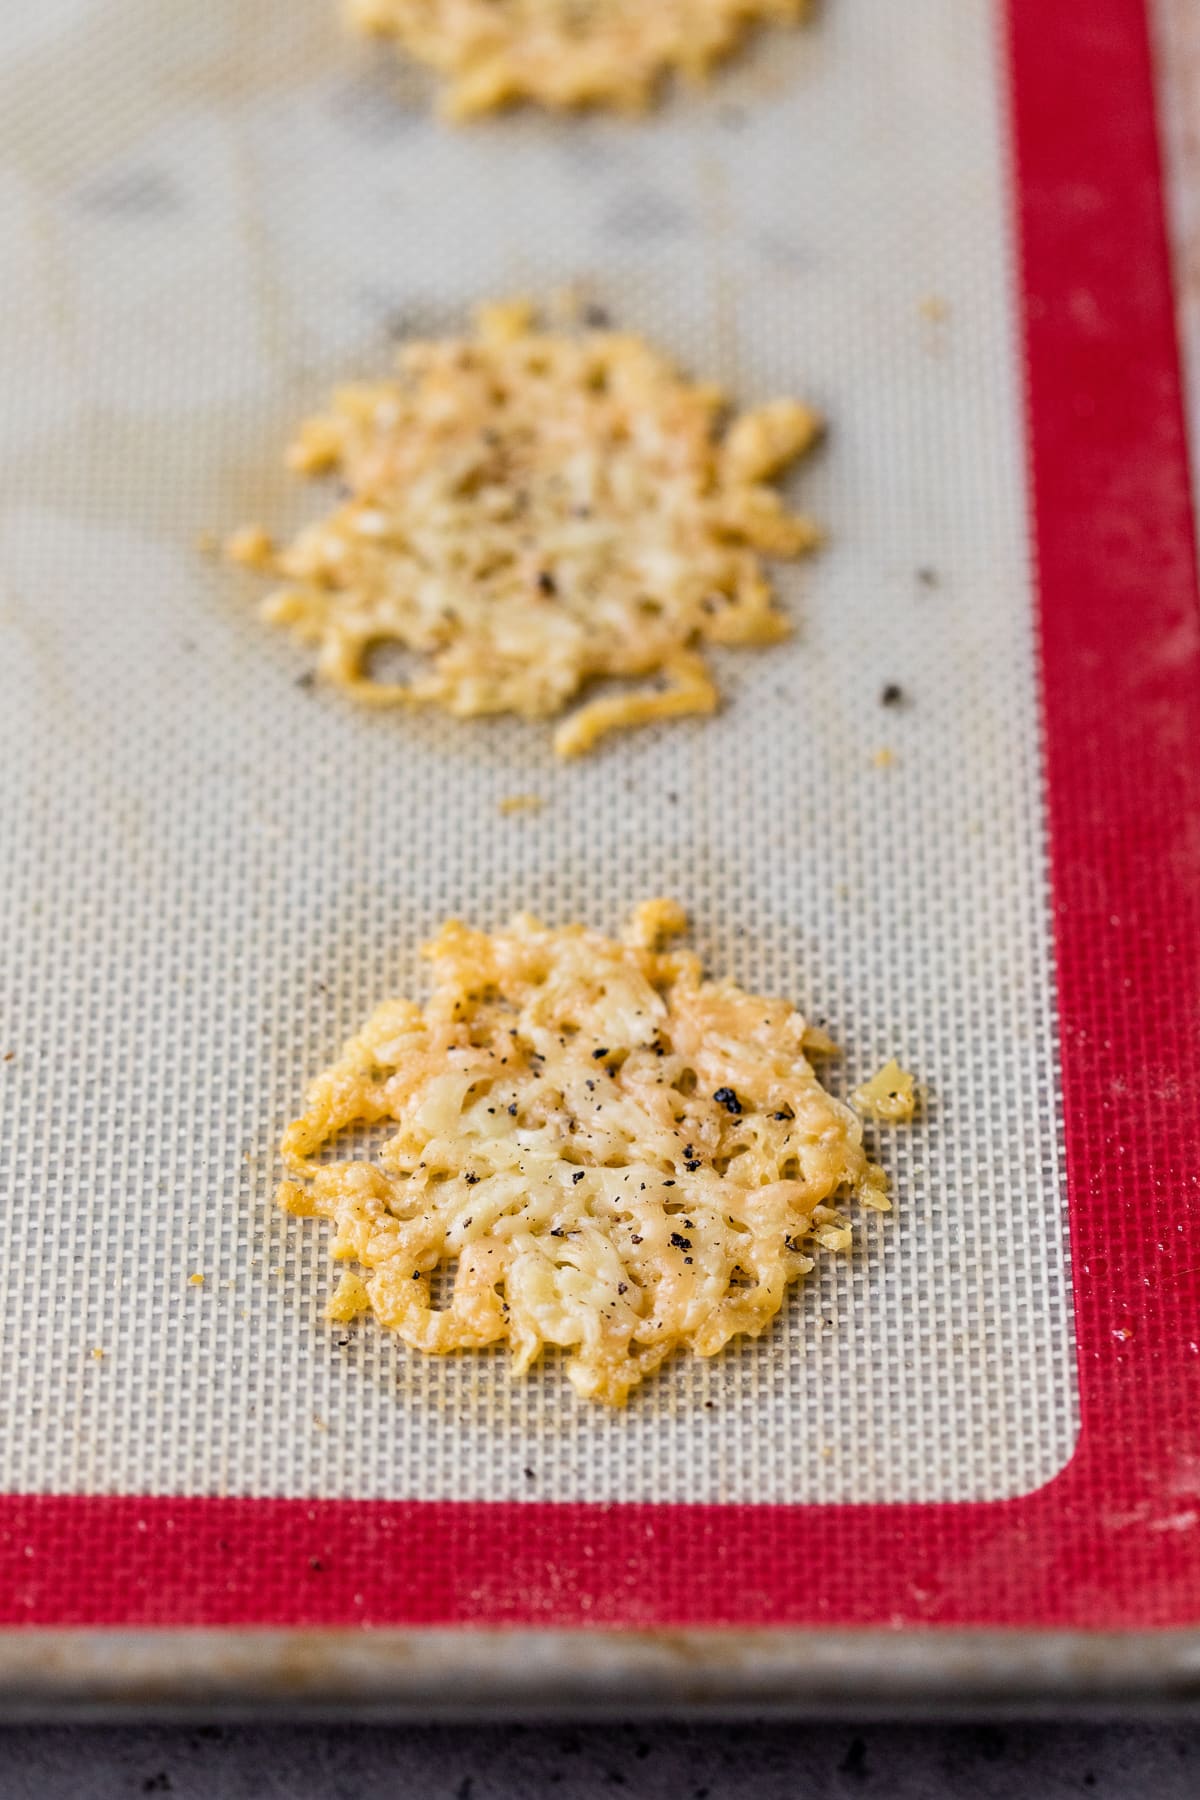 parmesan crisps out of the oven